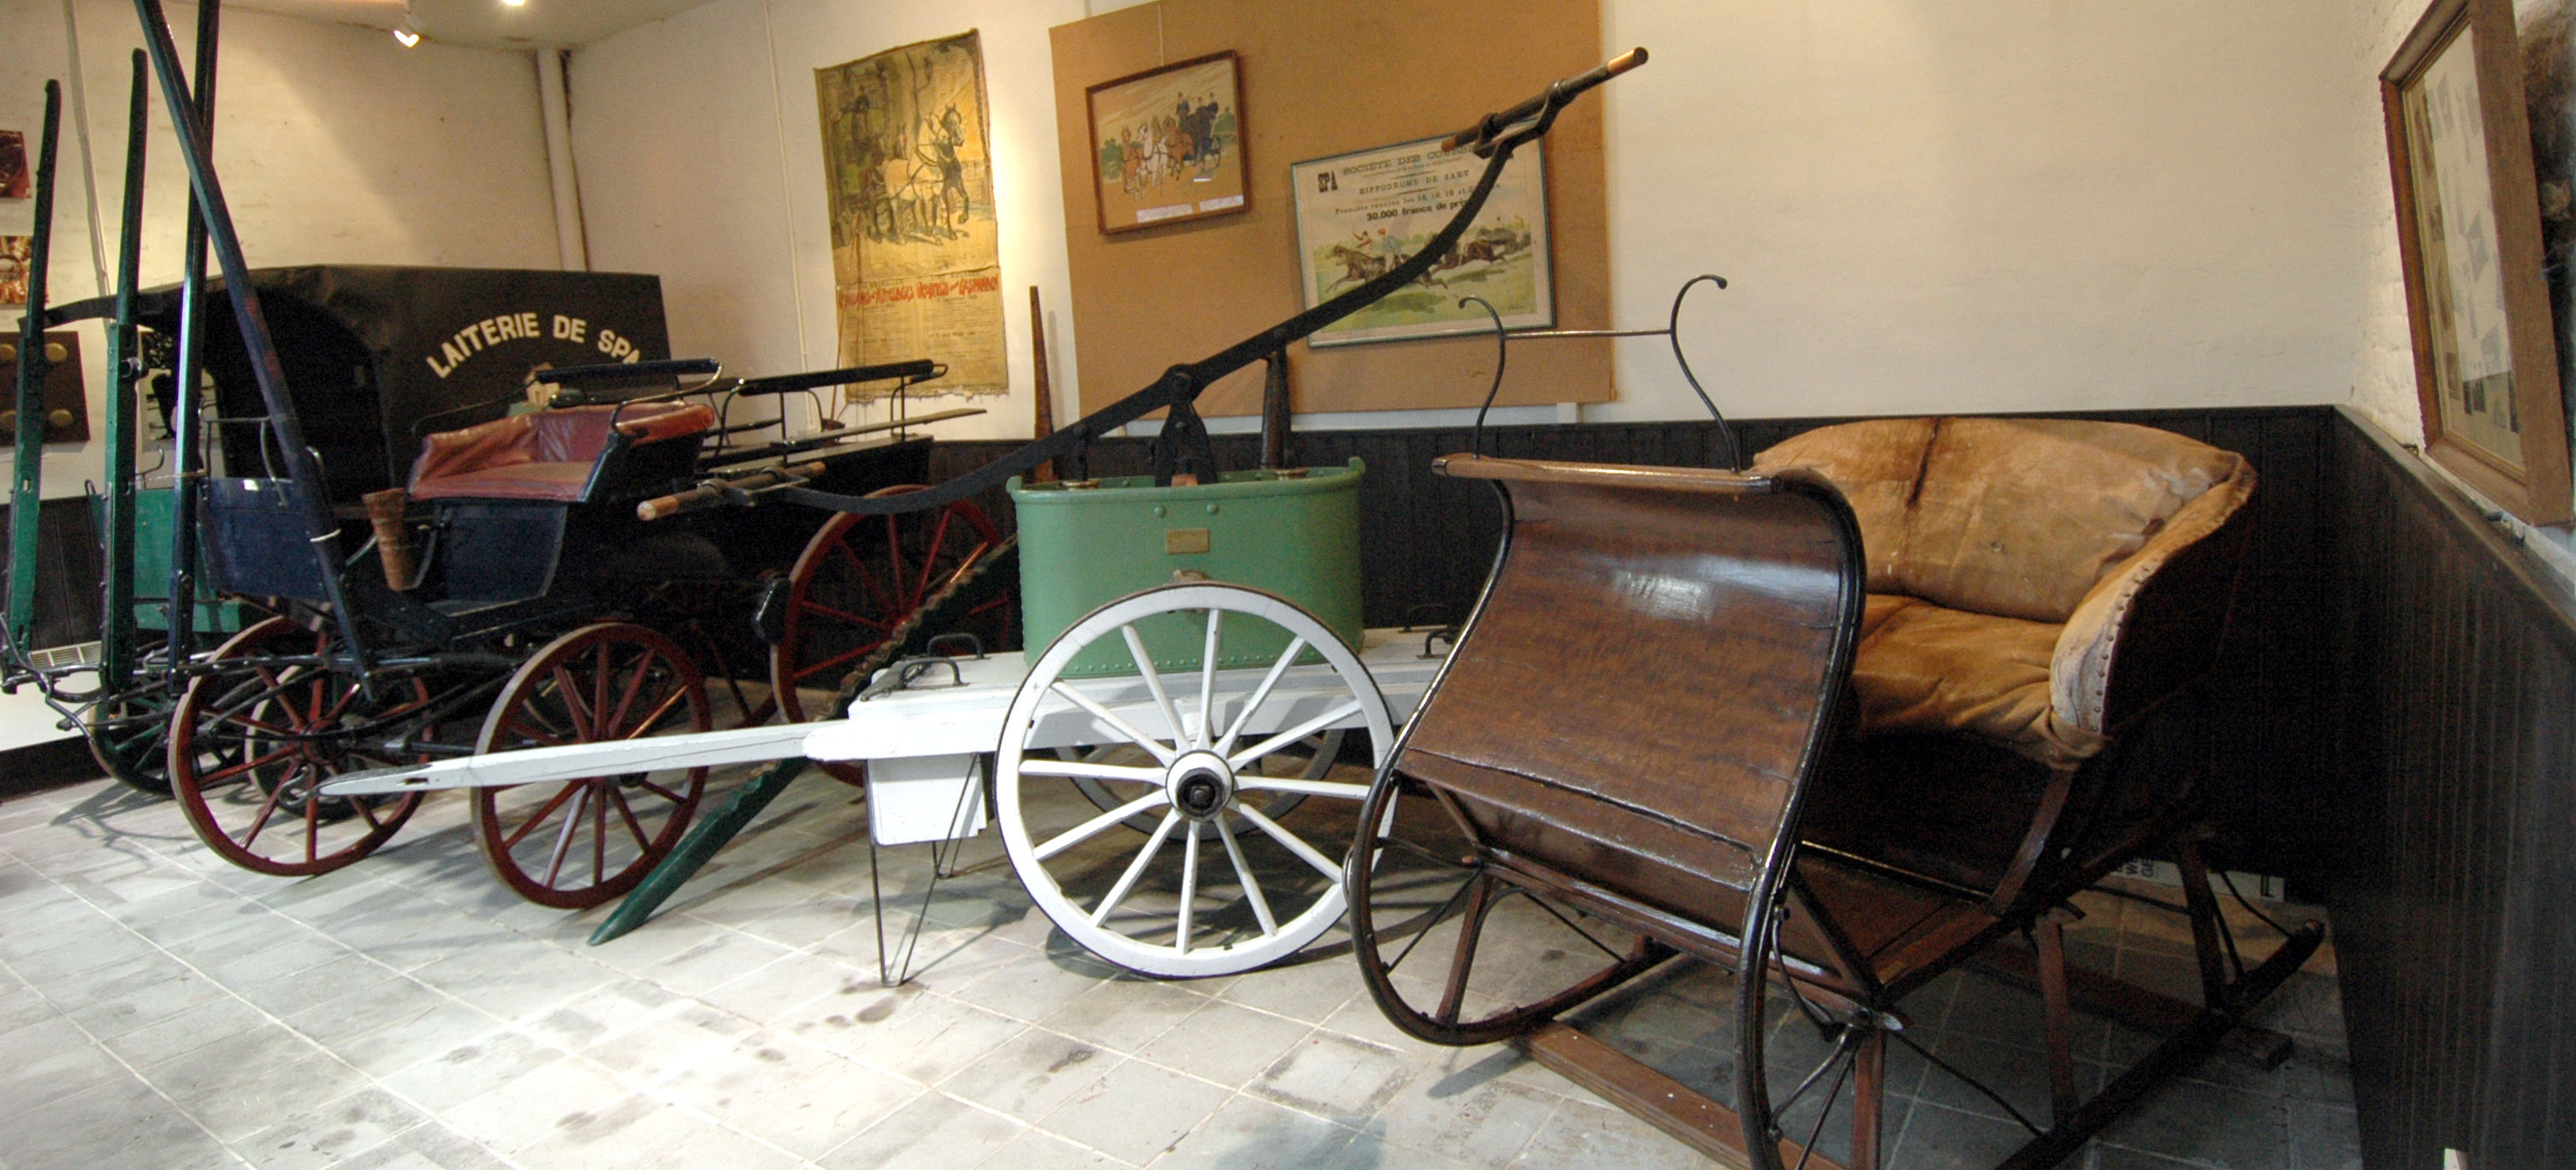 Carriages at the Horse Museum in Spa 